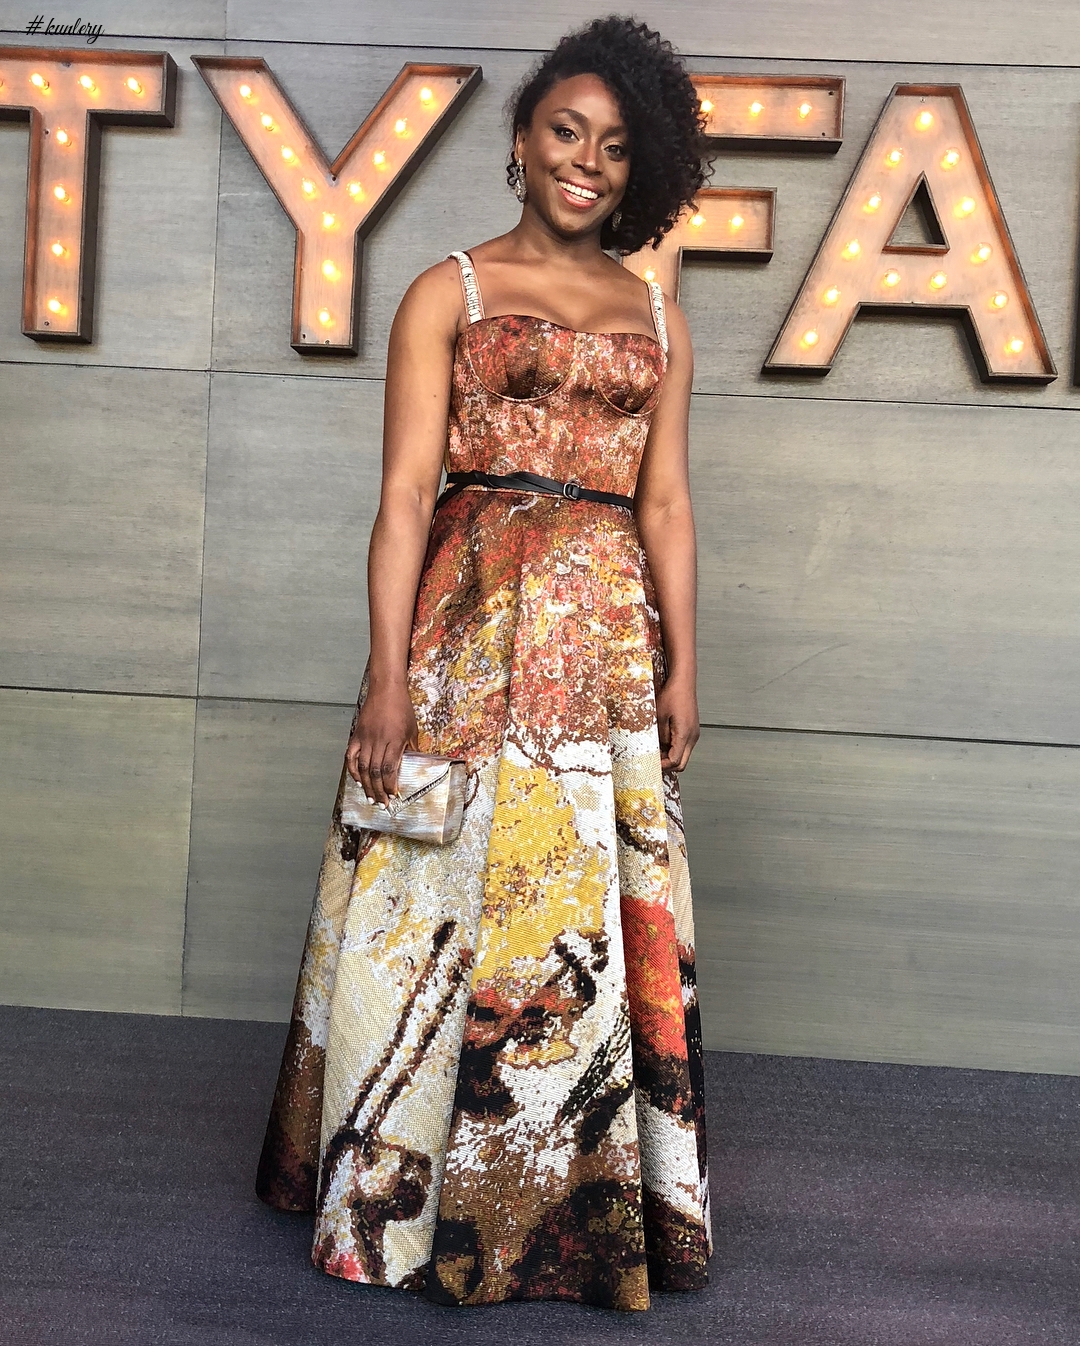 Runway To Real Life! Chimamanda Adichie In Dior For The Vanity Fair Oscar After Party